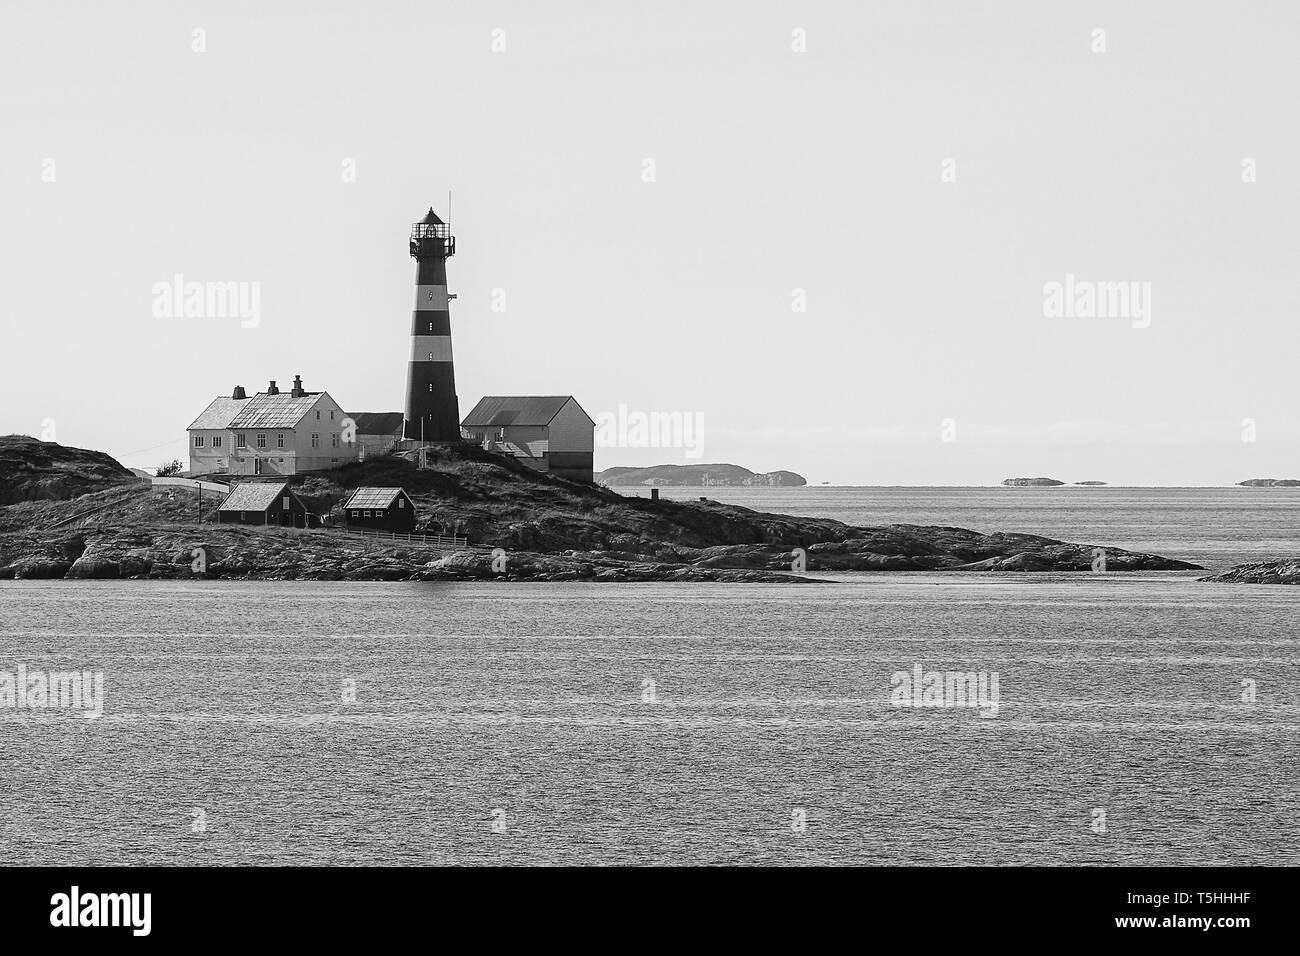 Black And White Photo Of The Remote Norwegian Landegode Lighthouse (Landegode Fyr), located on Eggløysa, About 100 Km North Of The Arctic Circle. Stock Photo